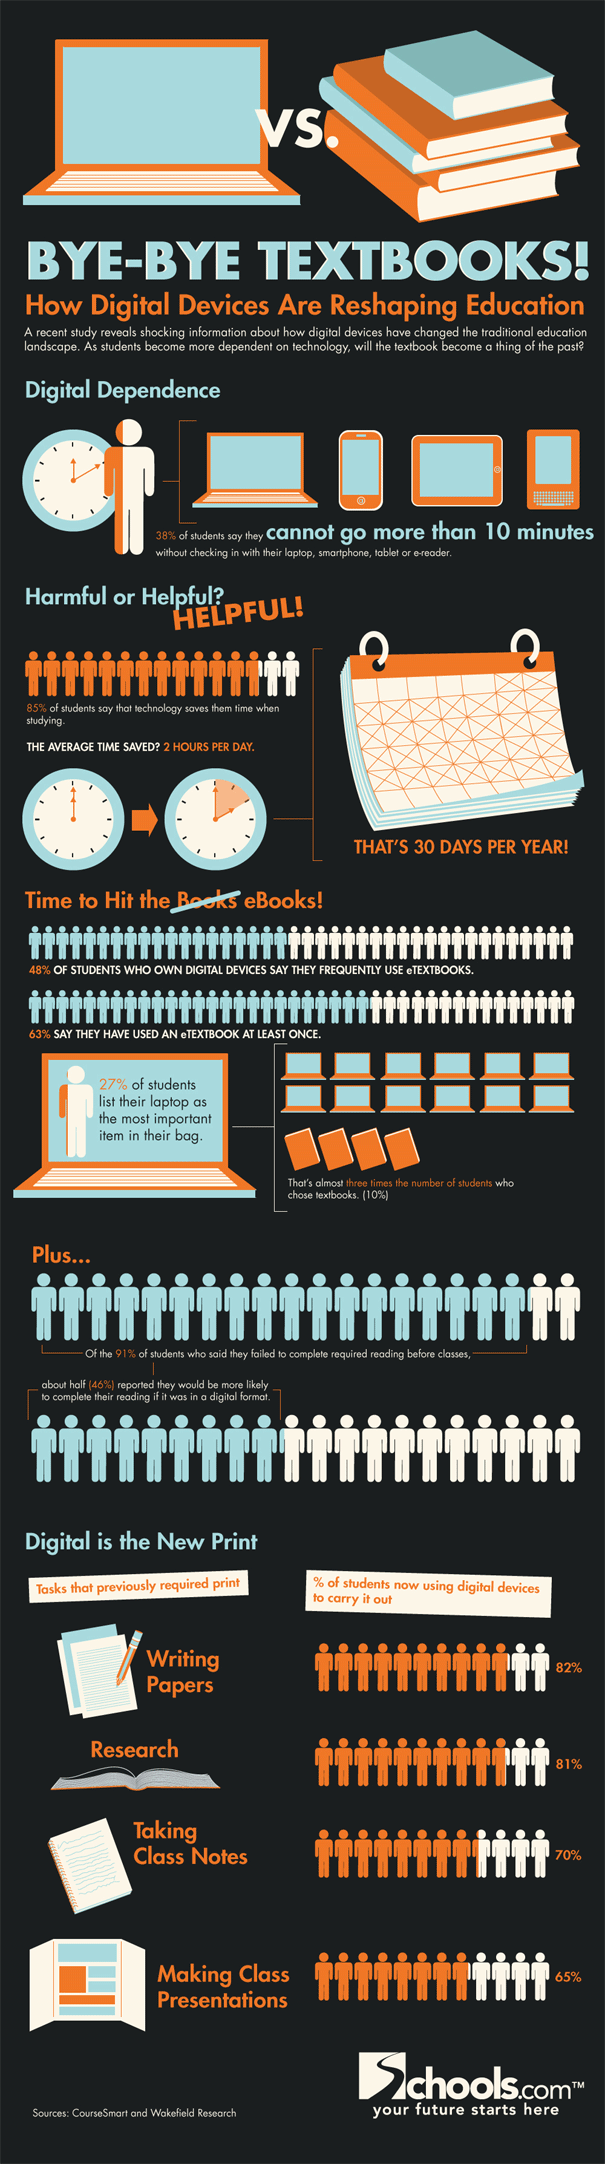 How Technology in the Classroom is Affecting Education [Infographic]